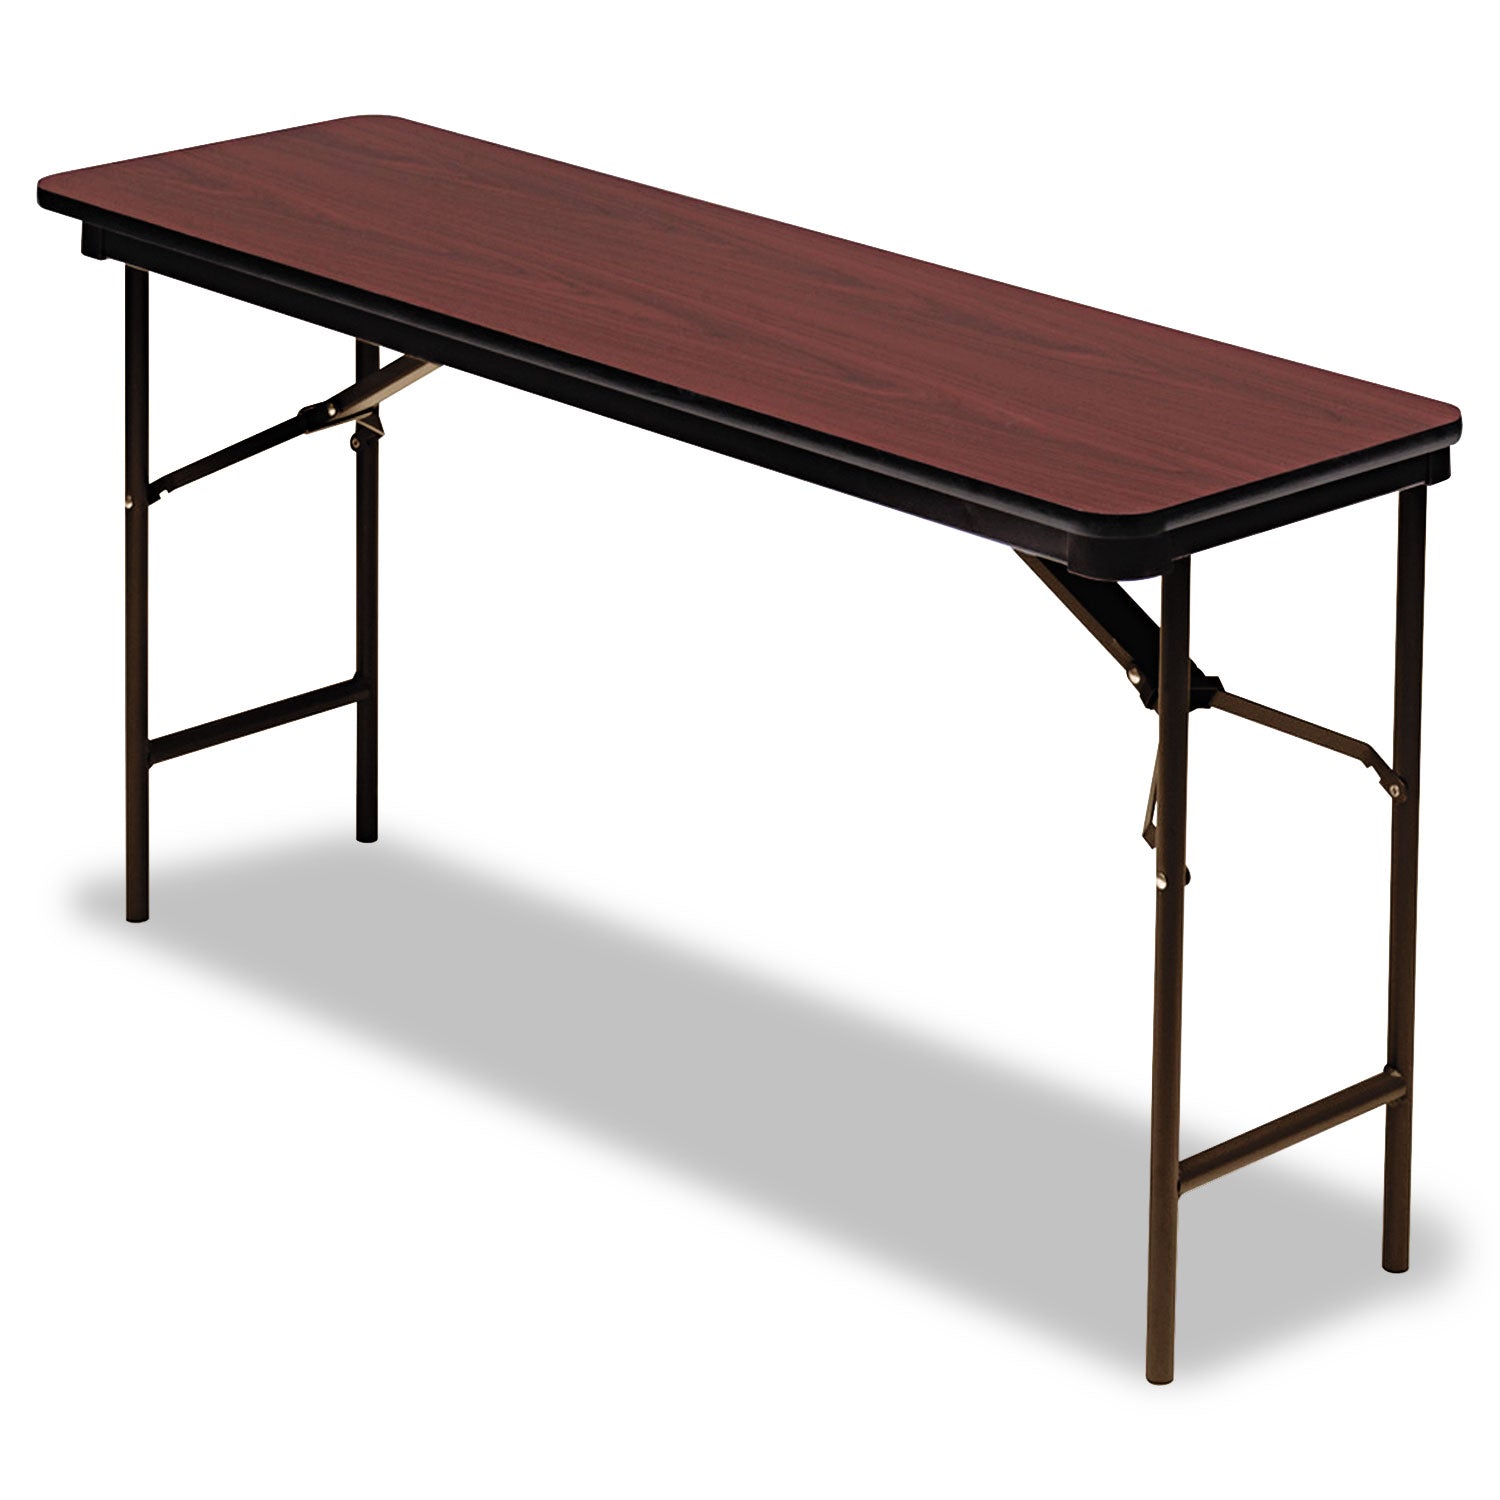 OfficeWorks Commercial Wood-Laminate Folding Table, Rectangular, 60" x 18" x 29", Mahogany Top, Brown Base - 